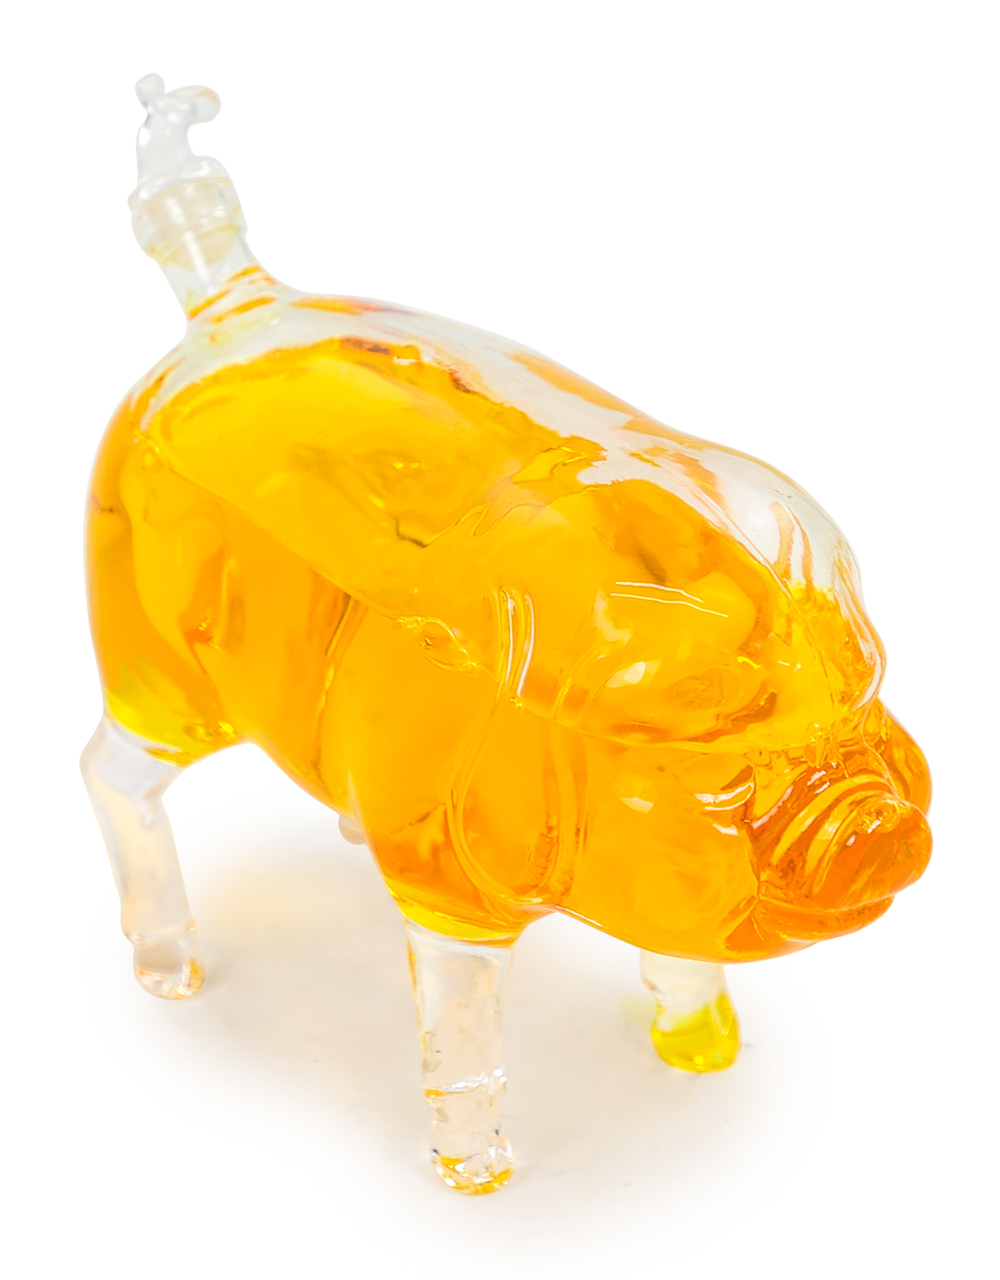 &Quirky Pig Glass Decanter